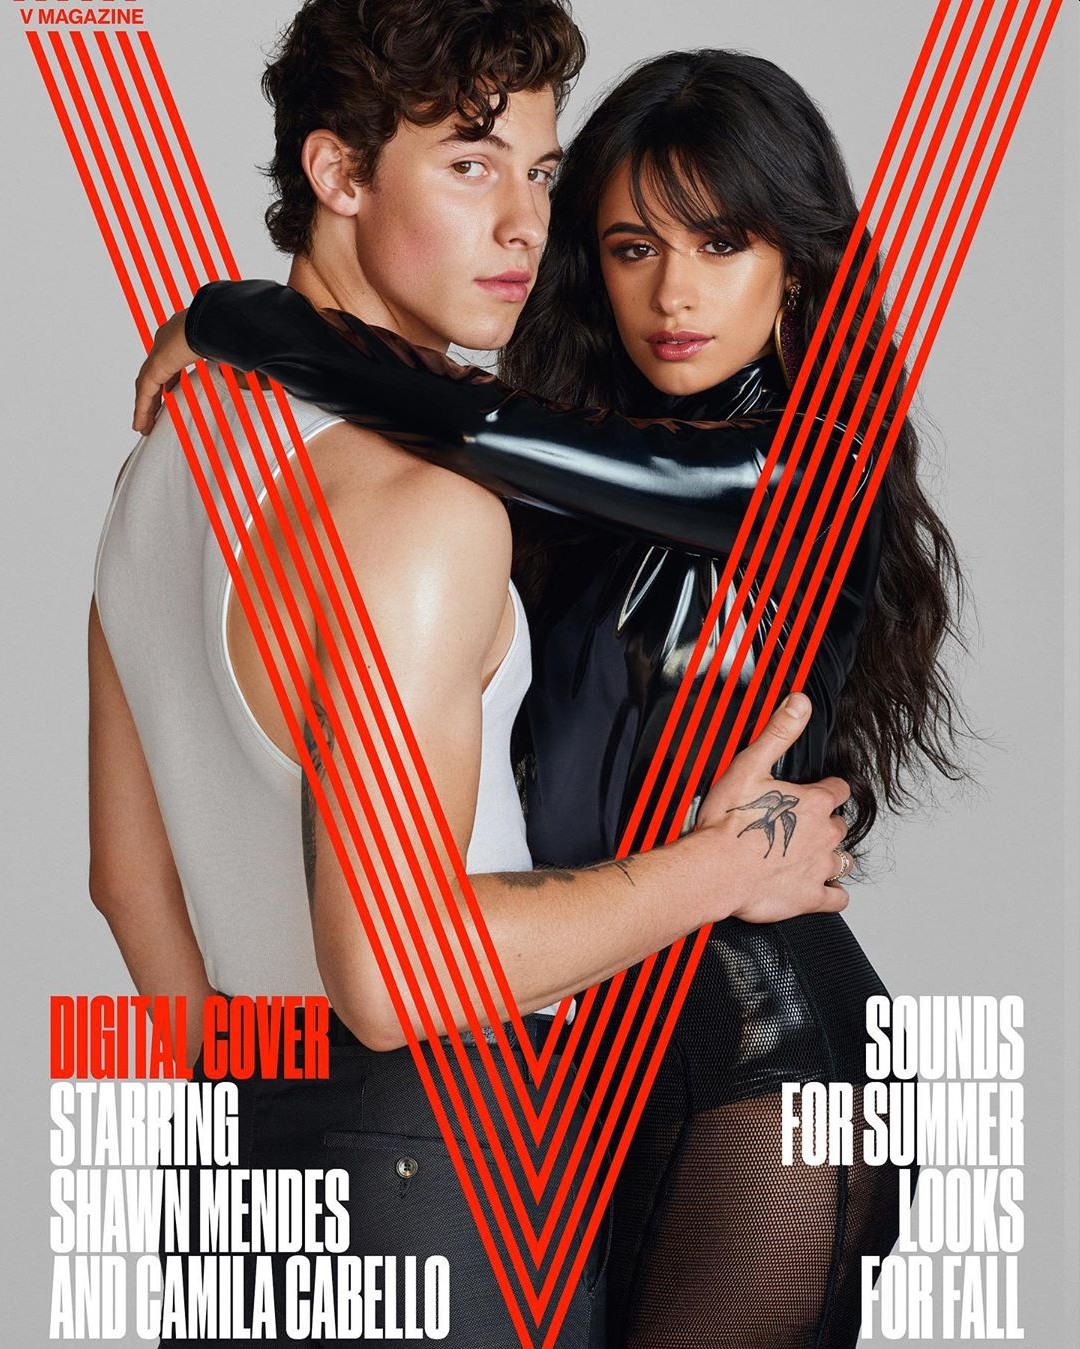 Camila Cabello broke up with her boyfriend, was it because of Shawn Mendes??